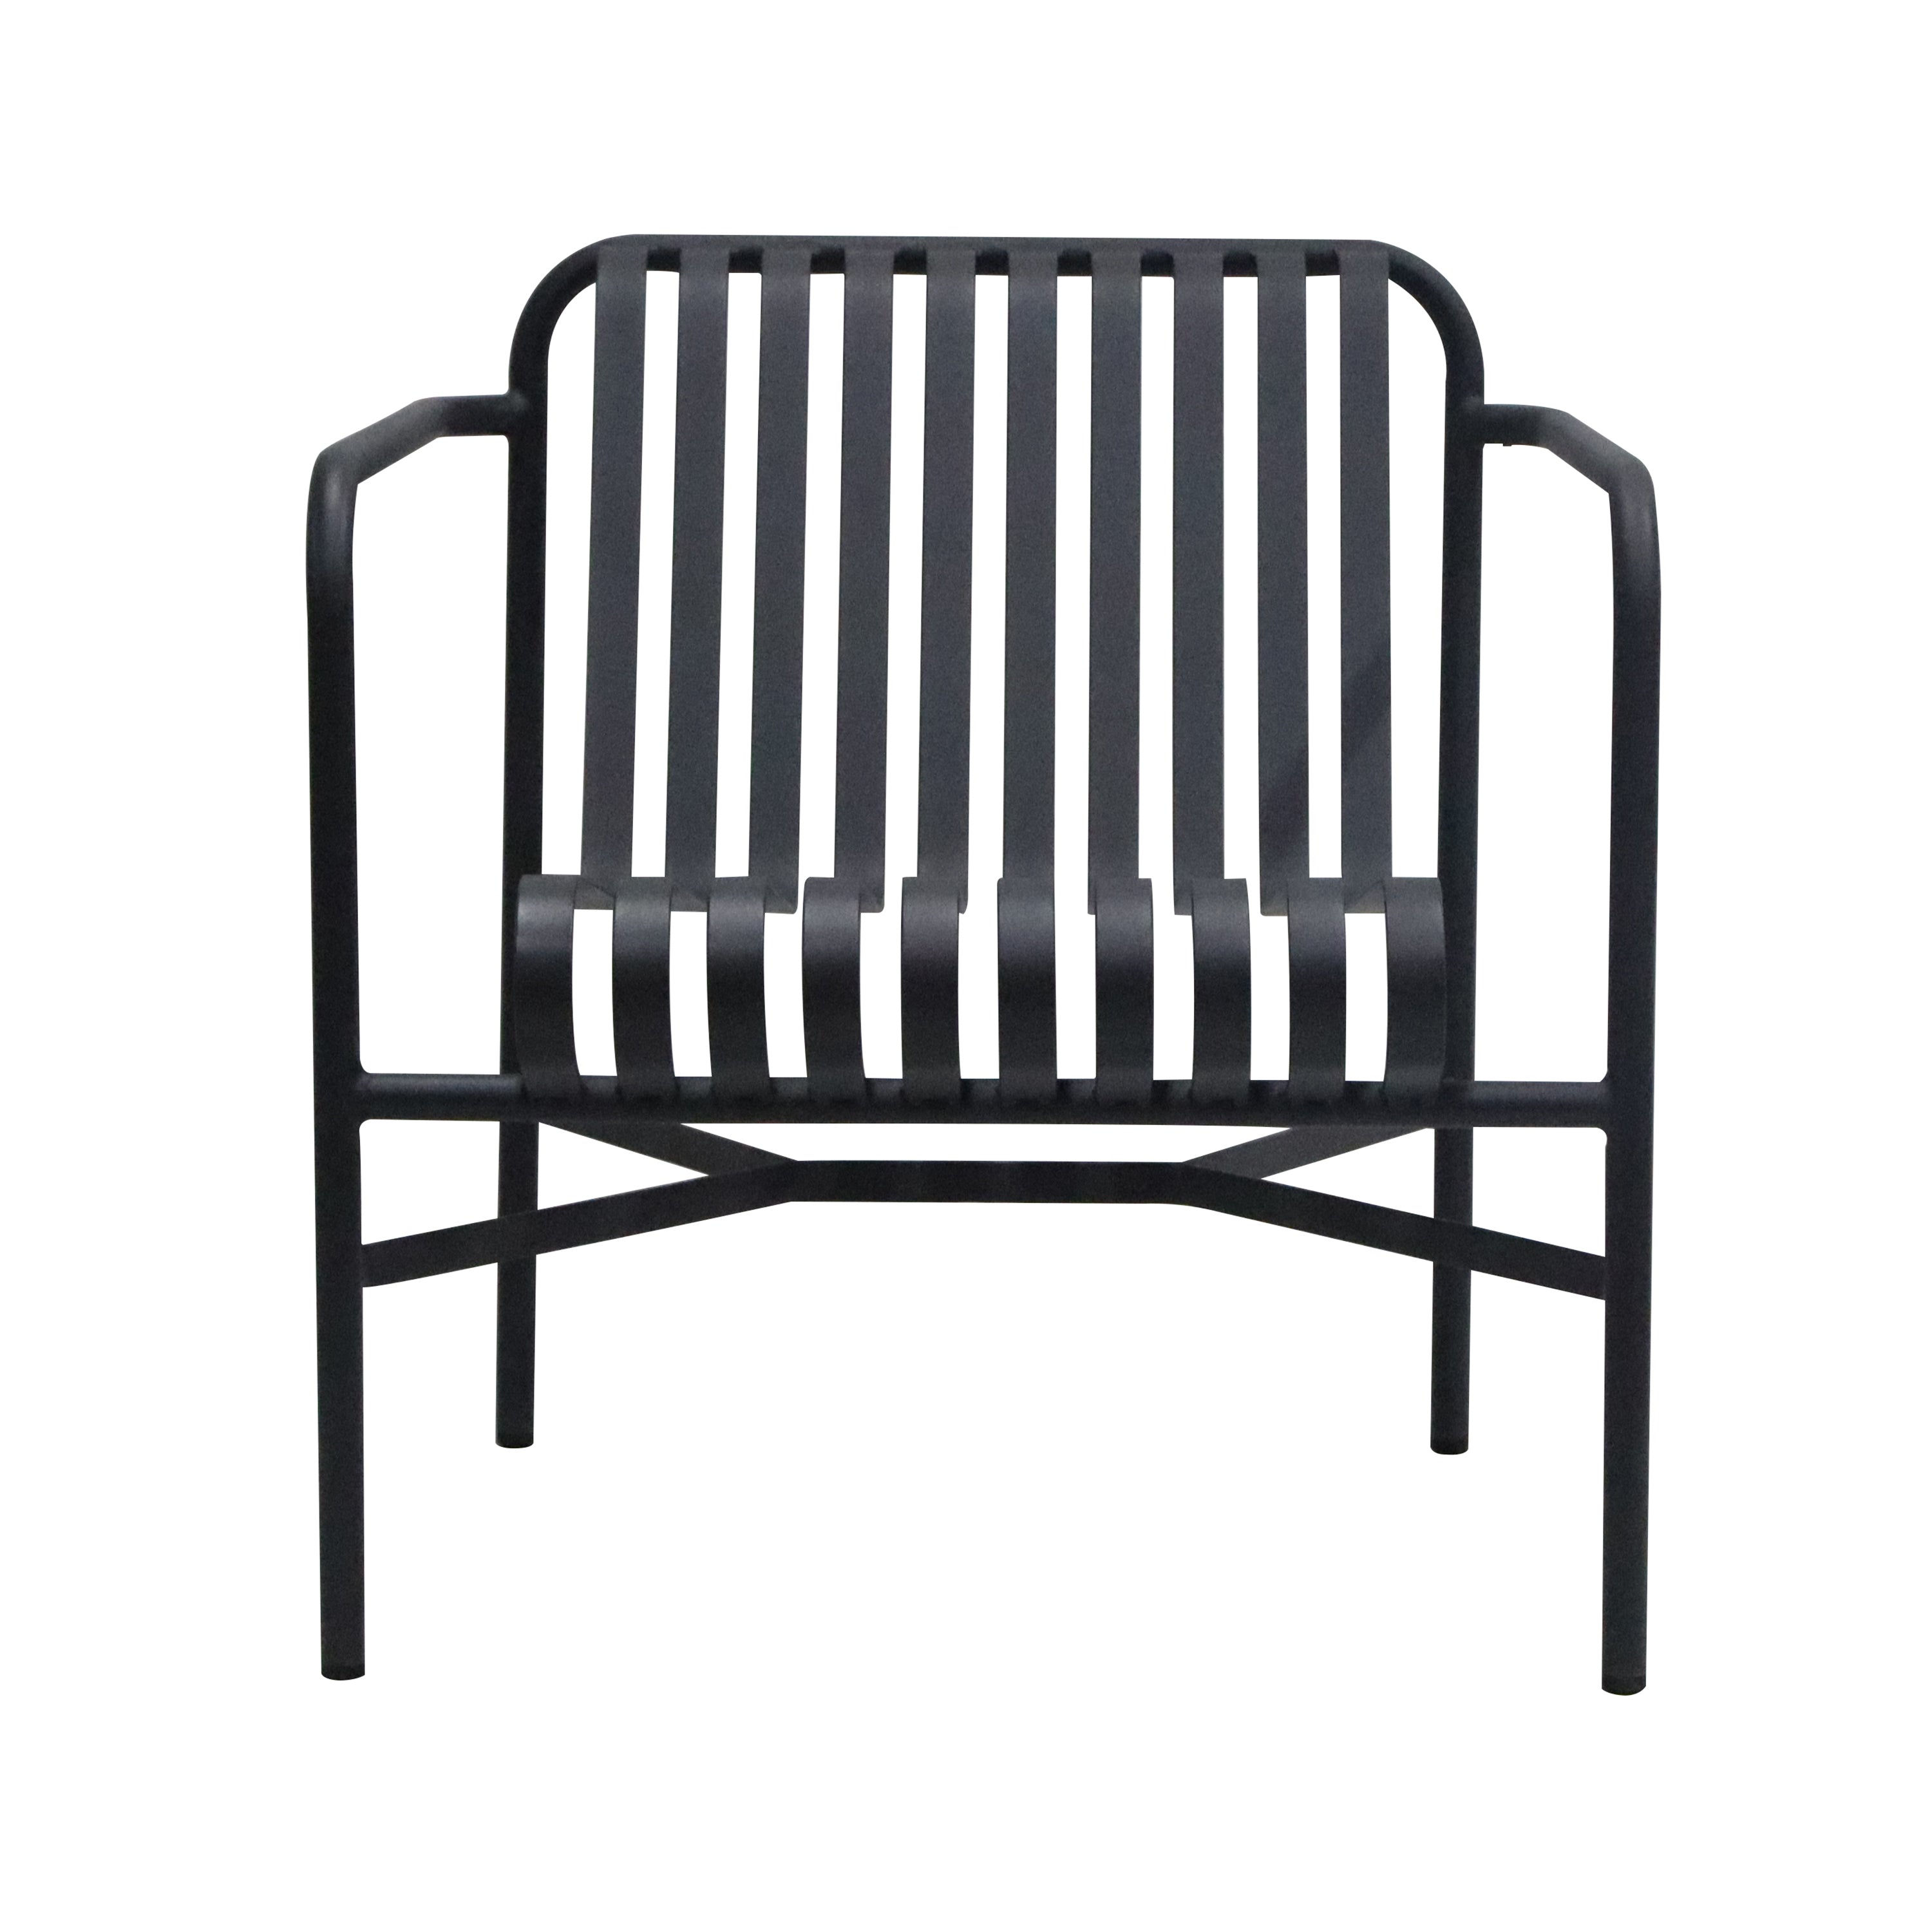 Euro Style Outdoor Chairs - Enid Outdoor Lounge Chair in Black - Set of 1